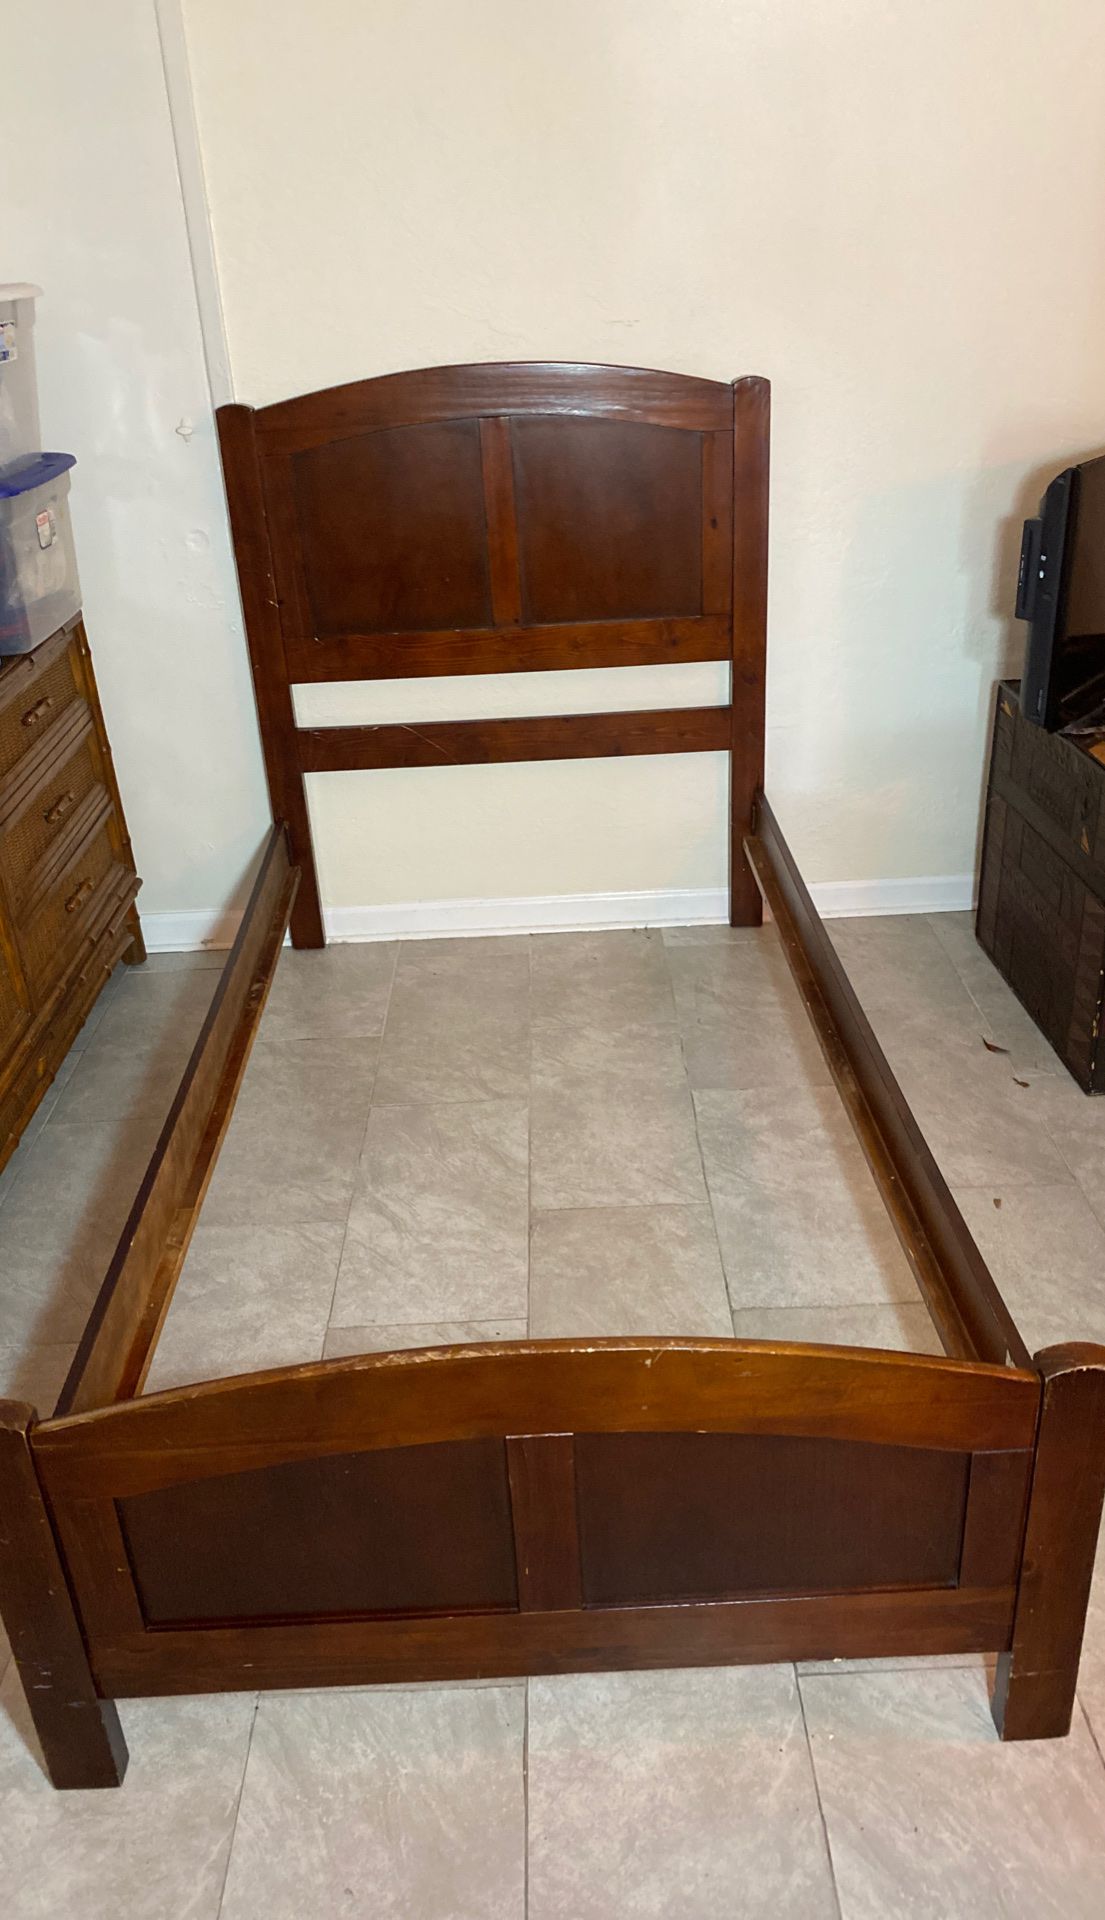 Wooden twin bed frame